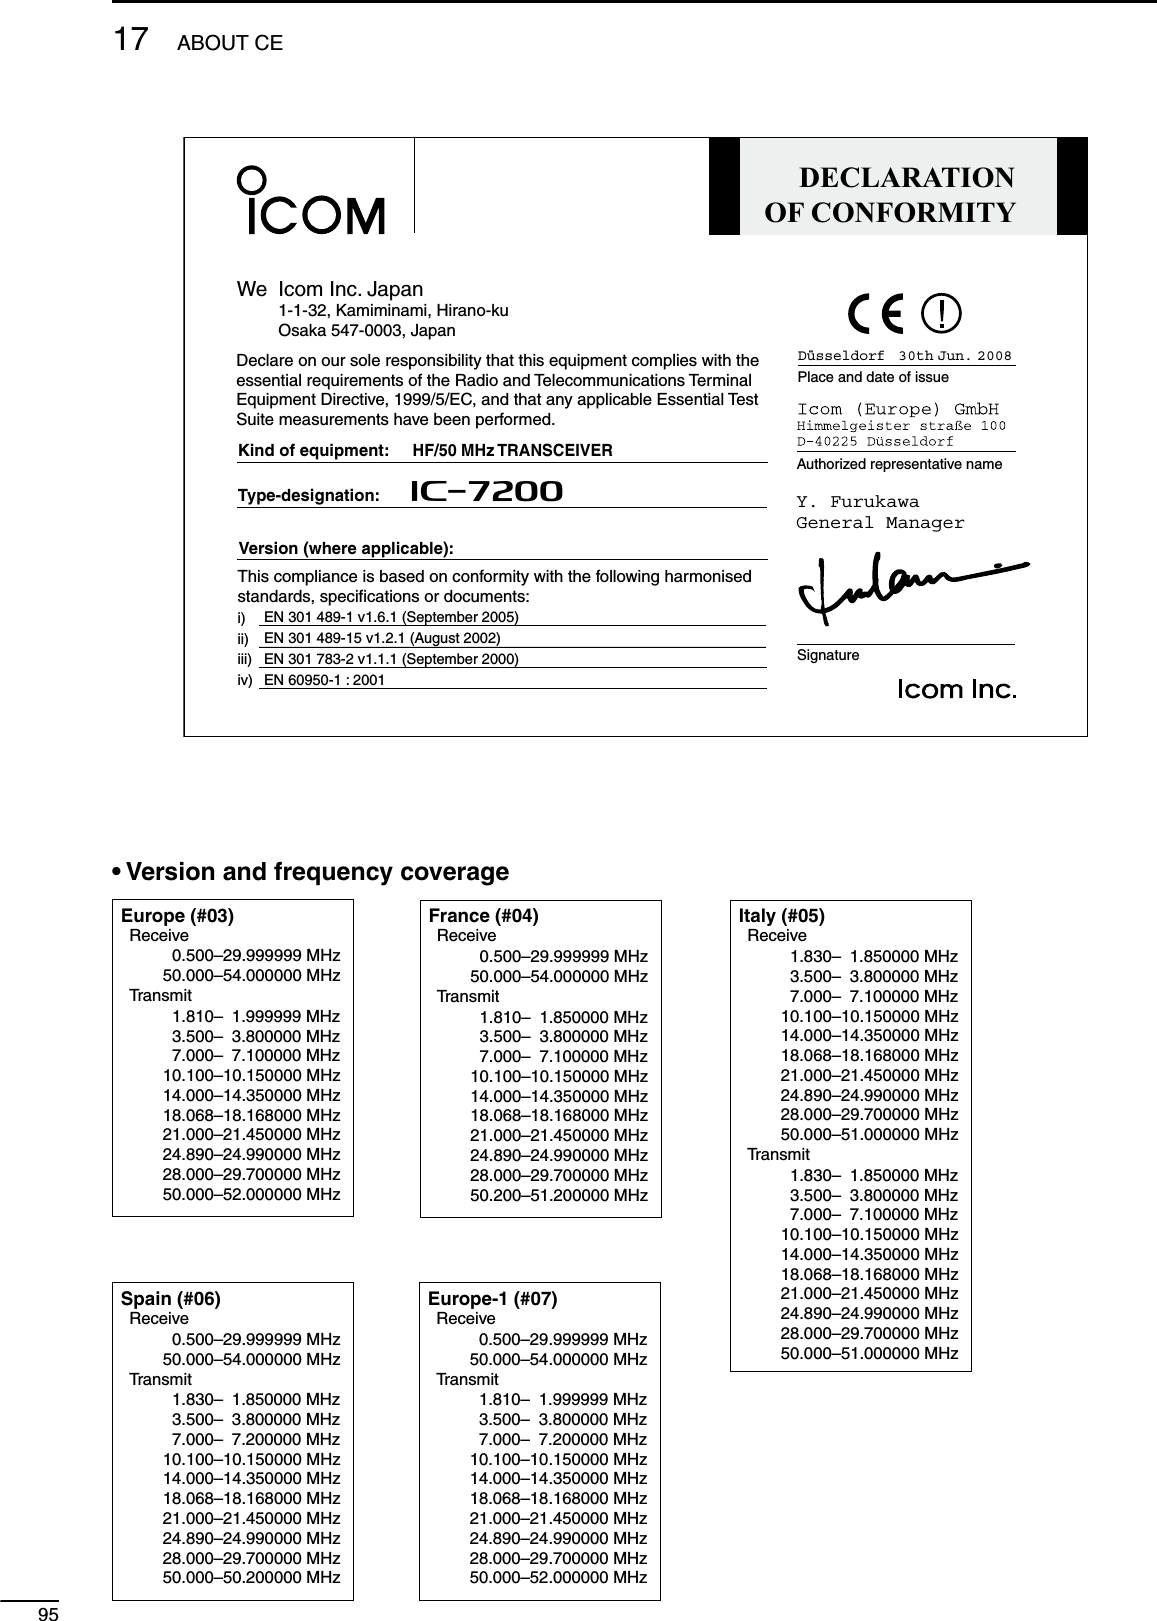 DECLARATIONOF CONFORMITYWe Icom Inc. Japan1-1-32, Kamiminami, Hirano-kuOsaka 547-0003, JapanKind of equipment:     HF/50 MHz TRANSCEIVERType-designation:       iC- 7200SignatureAuthorized representative namePlace and date of issueDeclare on our sole responsibility that this equipment complies with theessential requirements of the Radio and Telecommunications Terminal Equipment Directive, 1999/5/EC, and that any applicable Essential TestSuite measurements have been performed.Version (where applicable):This compliance is based on conformity with the following harmonised standards, specifications or documents:i)ii)iii)iv)Düsseldorf   30th Jun. 2008Y. FurukawaGeneral ManagerEN 301 489-1 v1.6.1 (September 2005)EN 301 489-15 v1.2.1 (August 2002) EN 301 783-2 v1.1.1 (September 2000)  EN 60950-1 : 2001  • Version and frequency coverageEurope (#03) Receive 0.500– 29.999999 MHz 50.000– 54.000000 MHz Transmit 1.810– 1.999999 MHz 3.500– 3.800000 MHz 7.000– 7.100000 MHz 10.100– 10.150000 MHz 14.000– 14.350000 MHz 18.068– 18.168000 MHz 21.000– 21.450000 MHz 24.890– 24.990000 MHz 28.000– 29.700000 MHz 50.000– 52.000000 MHzItaly (#05) Receive 1.830– 1.850000 MHz 3.500– 3.800000 MHz 7.000– 7.100000 MHz 10.100– 10.150000 MHz 14.000– 14.350000 MHz 18.068– 18.168000 MHz 21.000– 21.450000 MHz 24.890– 24.990000 MHz 28.000– 29.700000 MHz 50.000– 51.000000 MHz Transmit 1.830– 1.850000 MHz 3.500– 3.800000 MHz 7.000– 7.100000 MHz 10.100– 10.150000 MHz 14.000– 14.350000 MHz 18.068– 18.168000 MHz 21.000– 21.450000 MHz 24.890– 24.990000 MHz 28.000– 29.700000 MHz 50.000– 51.000000 MHzSpain (#06) Receive 0.500– 29.999999 MHz 50.000– 54.000000 MHz Transmit 1.830– 1.850000 MHz 3.500– 3.800000 MHz 7.000– 7.200000 MHz 10.100– 10.150000 MHz 14.000– 14.350000 MHz 18.068– 18.168000 MHz 21.000– 21.450000 MHz 24.890– 24.990000 MHz 28.000– 29.700000 MHz 50.000– 50.200000 MHzEurope-1 (#07) Receive 0.500– 29.999999 MHz 50.000– 54.000000 MHz Transmit 1.810– 1.999999 MHz 3.500– 3.800000 MHz 7.000– 7.200000 MHz 10.100– 10.150000 MHz 14.000– 14.350000 MHz 18.068– 18.168000 MHz 21.000– 21.450000 MHz 24.890– 24.990000 MHz 28.000– 29.700000 MHz 50.000– 52.000000 MHzFrance (#04) Receive 0.500– 29.999999 MHz 50.000– 54.000000 MHz Transmit 1.810– 1.850000 MHz 3.500– 3.800000 MHz 7.000– 7.100000 MHz 10.100– 10.150000 MHz 14.000– 14.350000 MHz 18.068– 18.168000 MHz 21.000– 21.450000 MHz 24.890– 24.990000 MHz 28.000– 29.700000 MHz 50.200– 51.200000 MHz9517 ABOUT CE